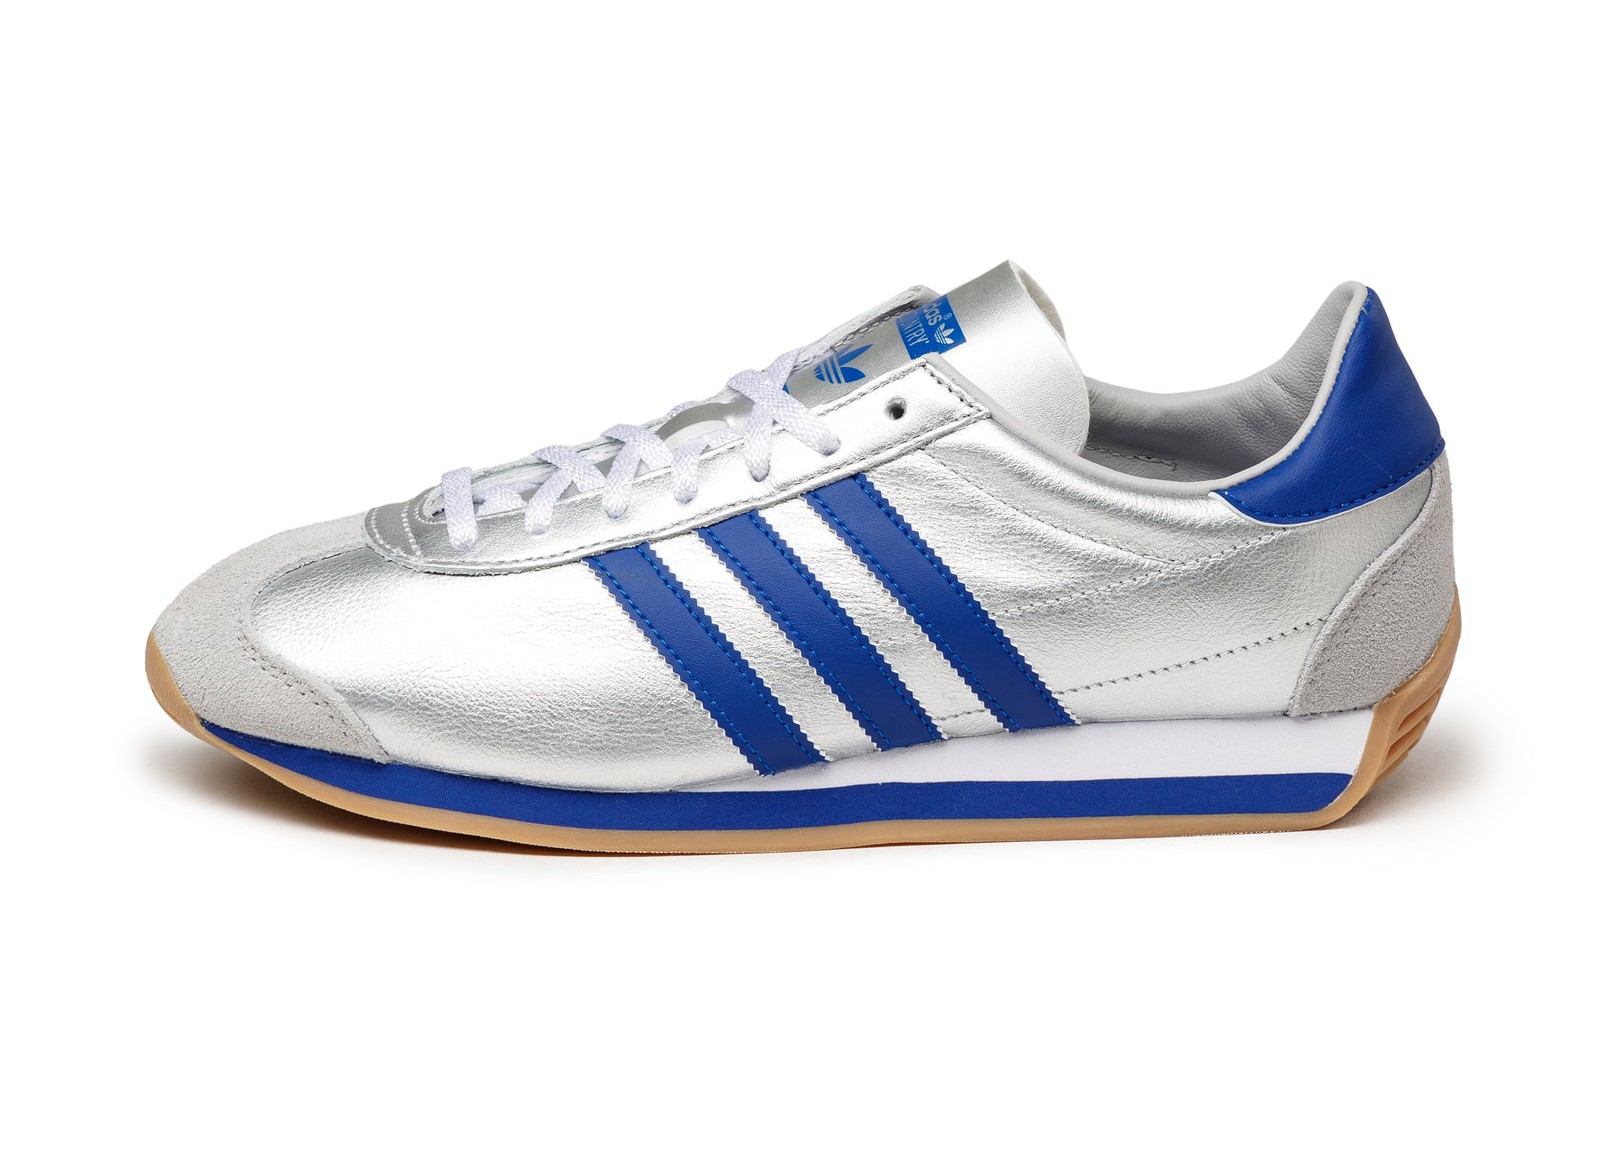 Adidas Country OG
Matte Silver / Bright Blue